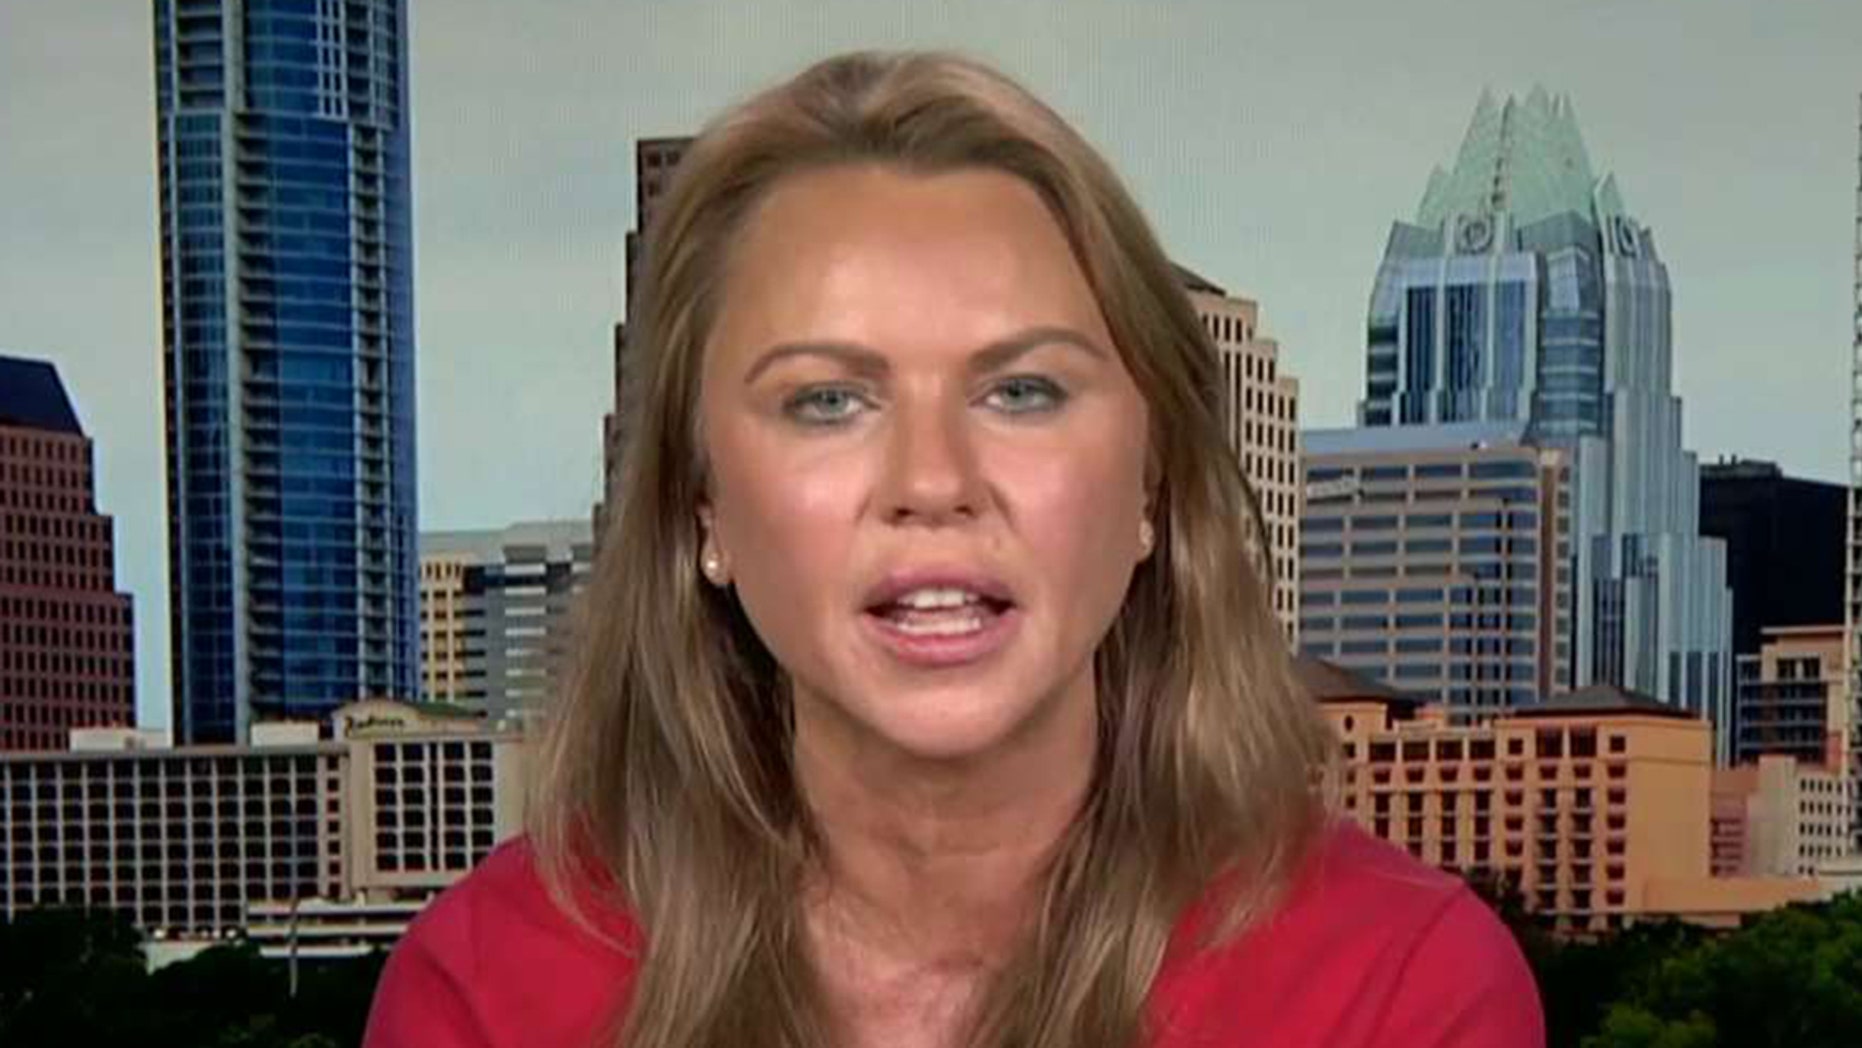 Lara Logan claims a 2014 article in New York magazine about her reporting on Benghazi hurt her reputation and career